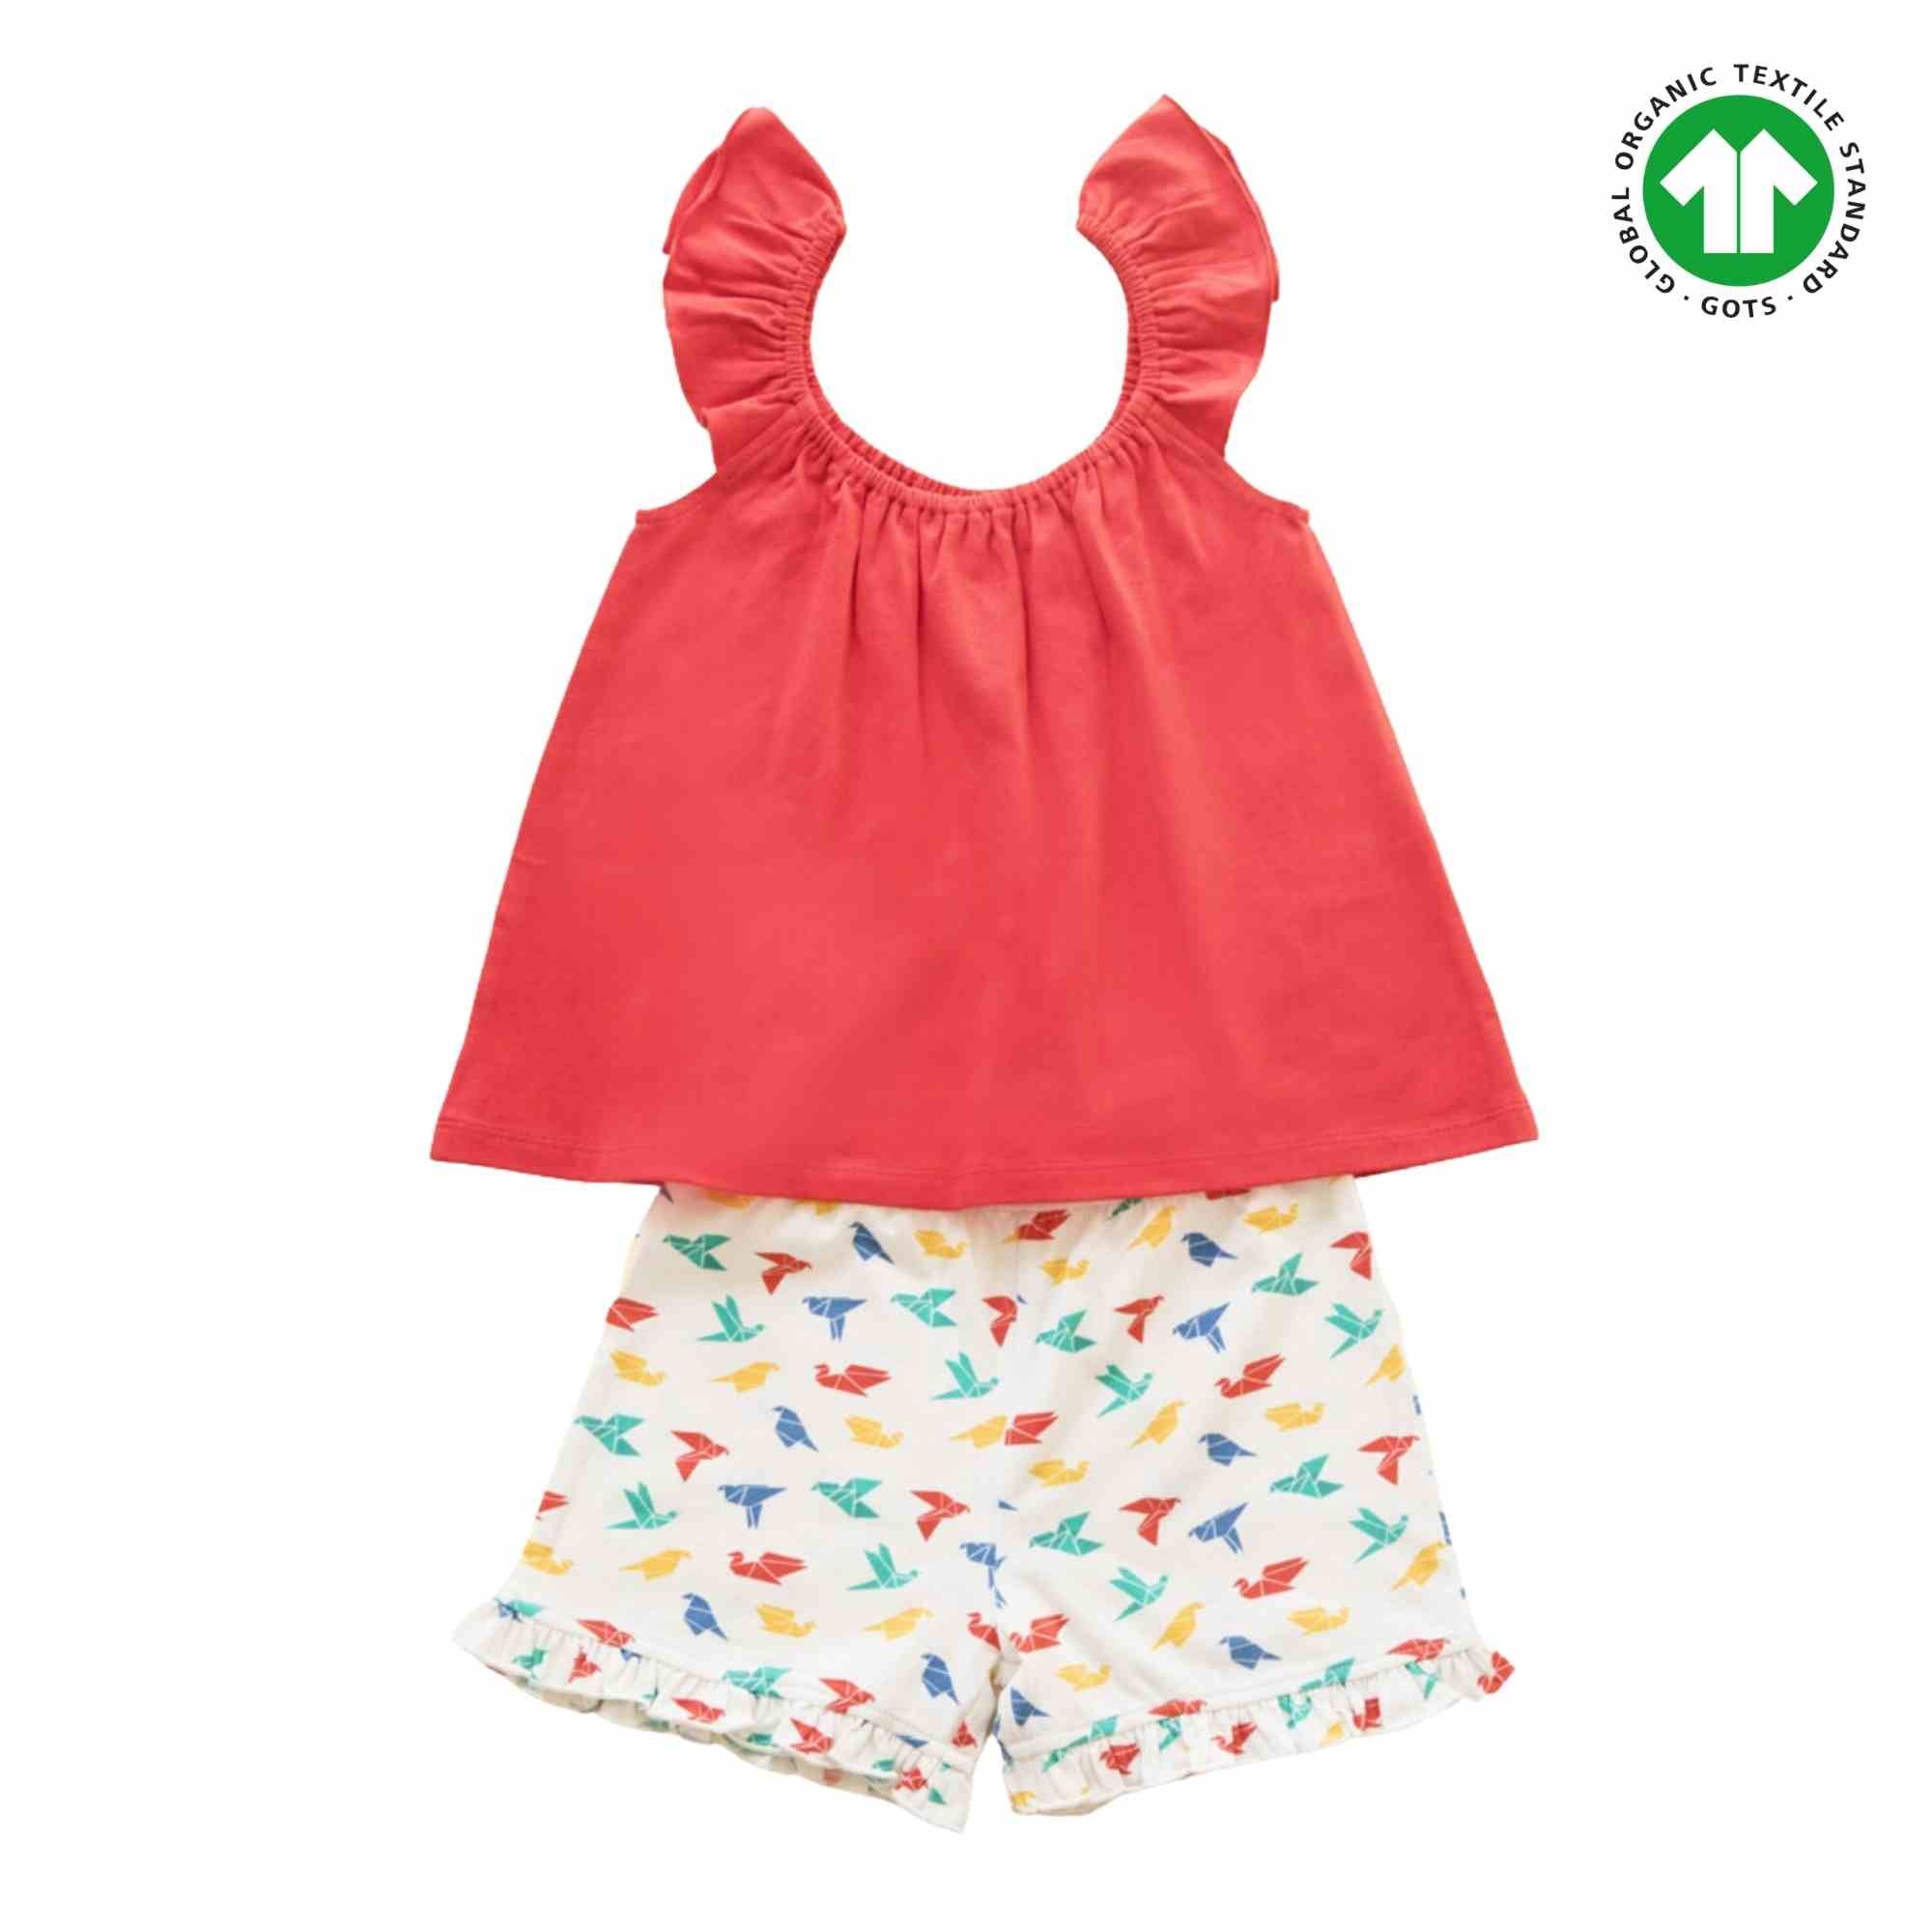 Co-ord Sets for girls